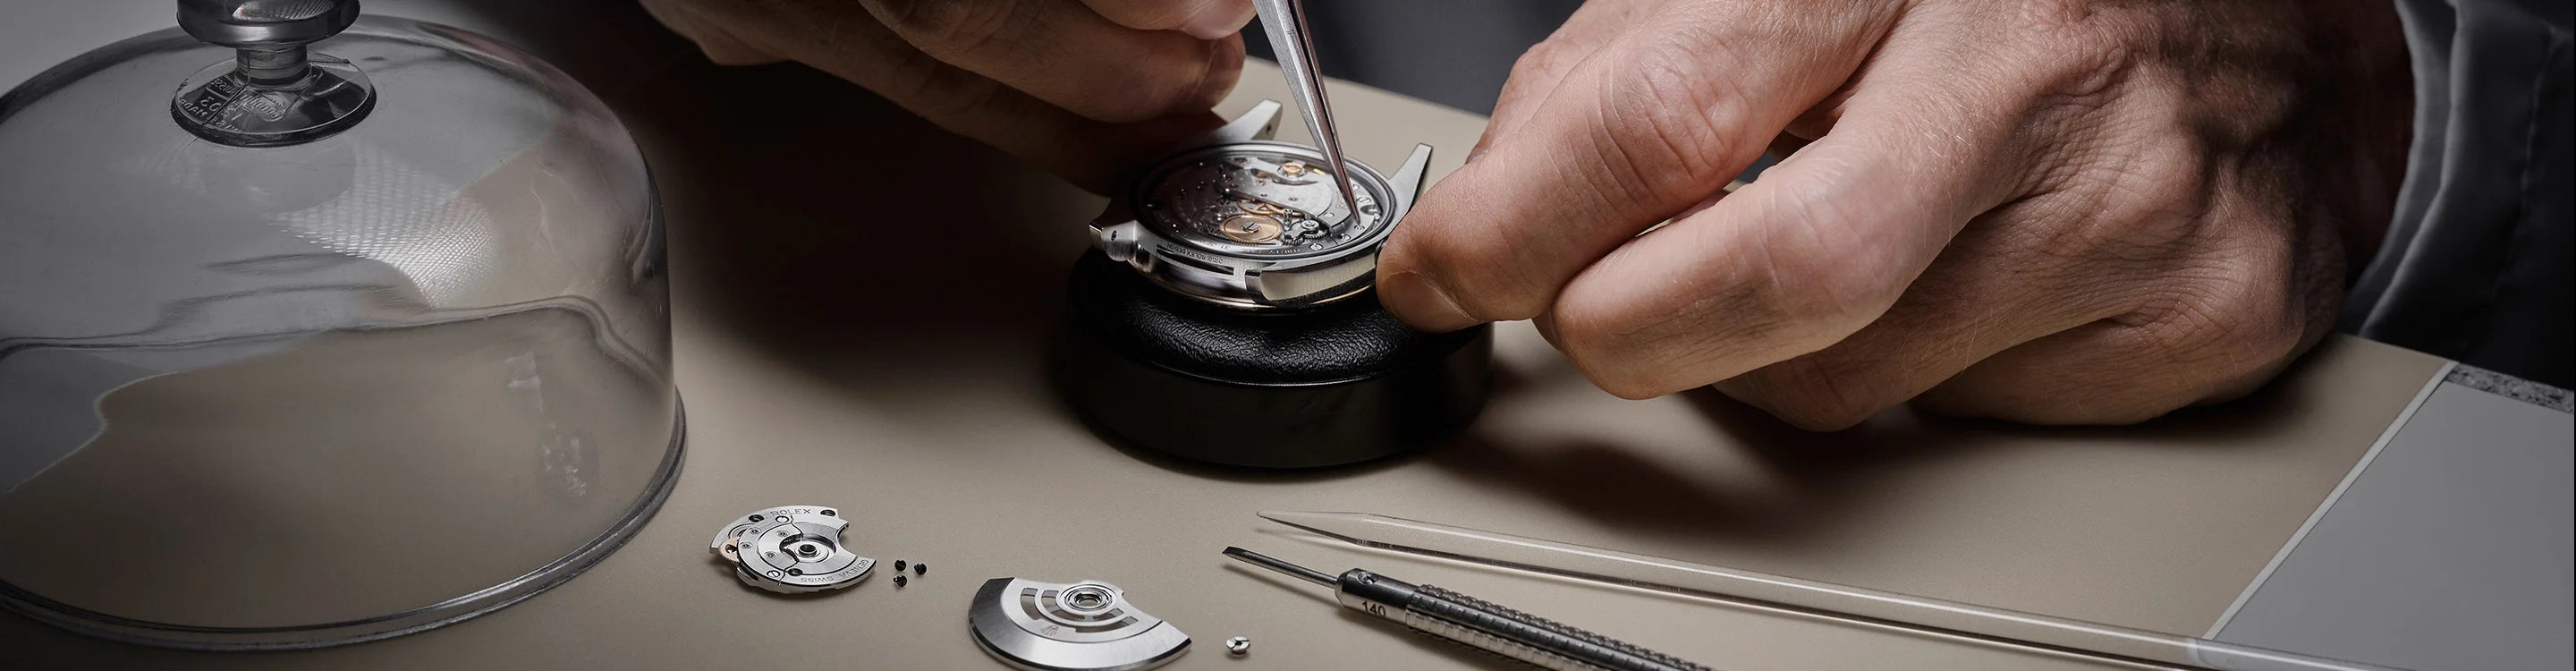 Servicing Your Rolex at Shreve & Co. in San Francisco and Palo Alto, CA